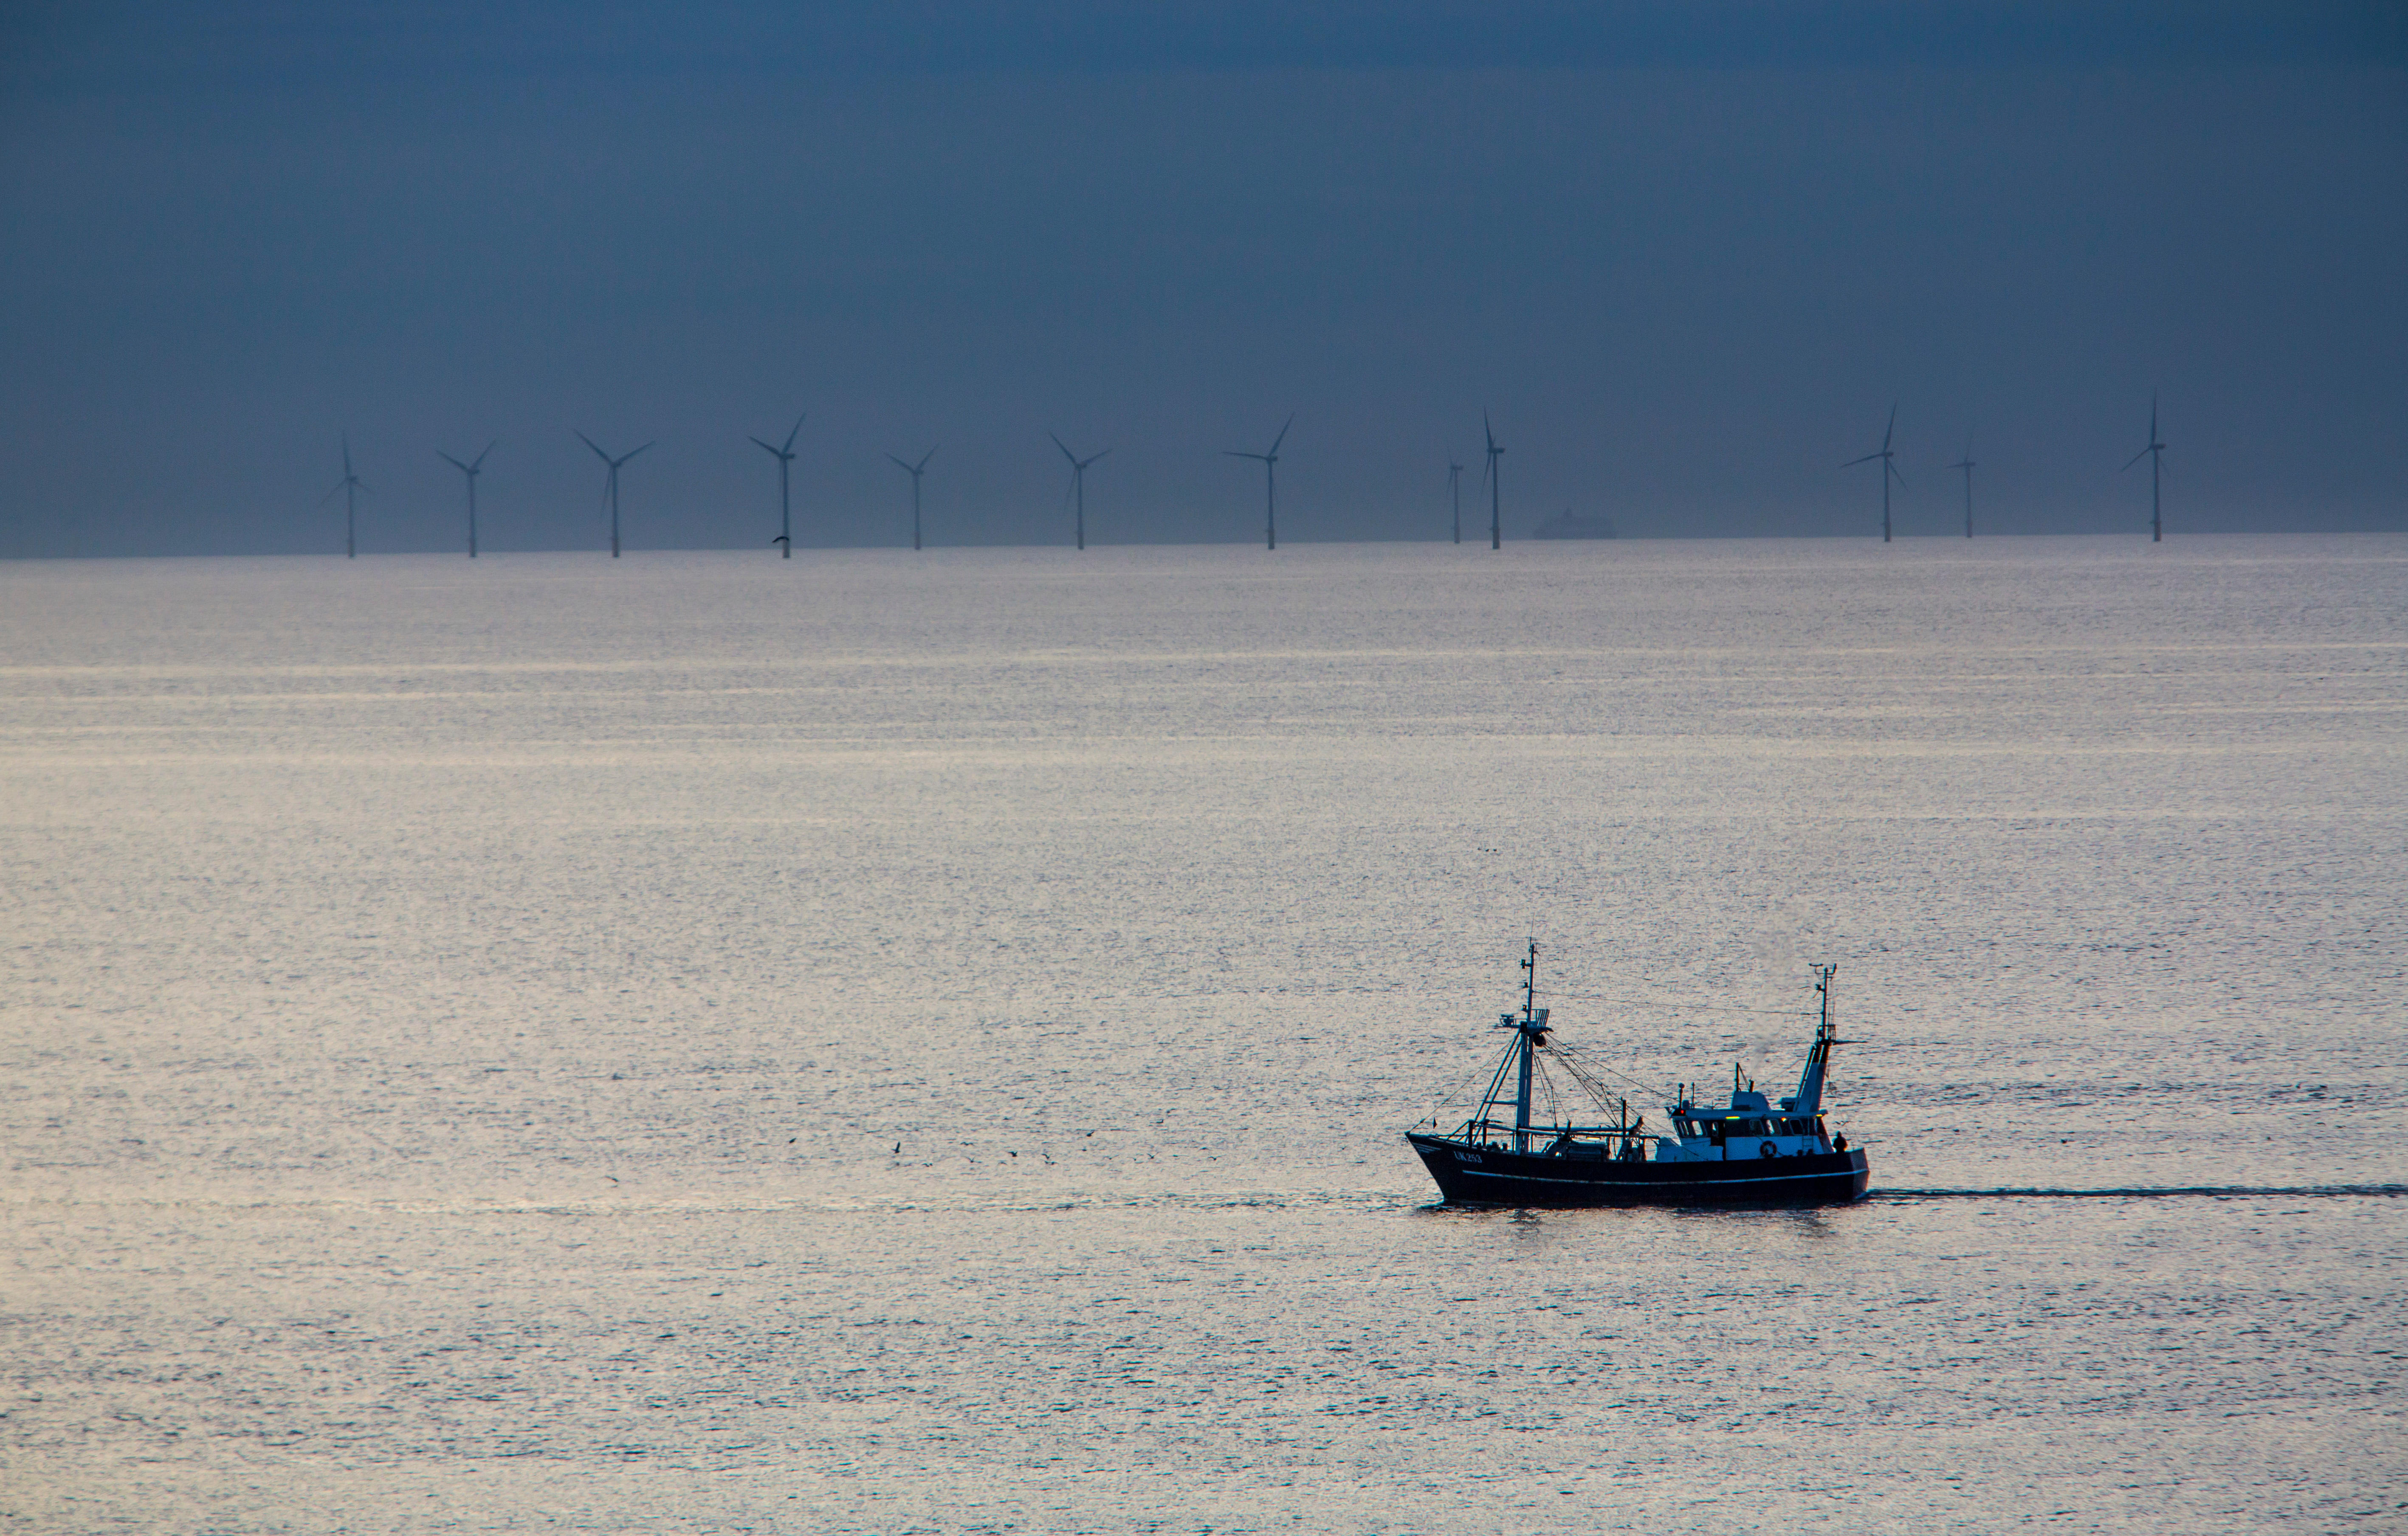 Fishing vessel at sea in front of an offshore windfarm